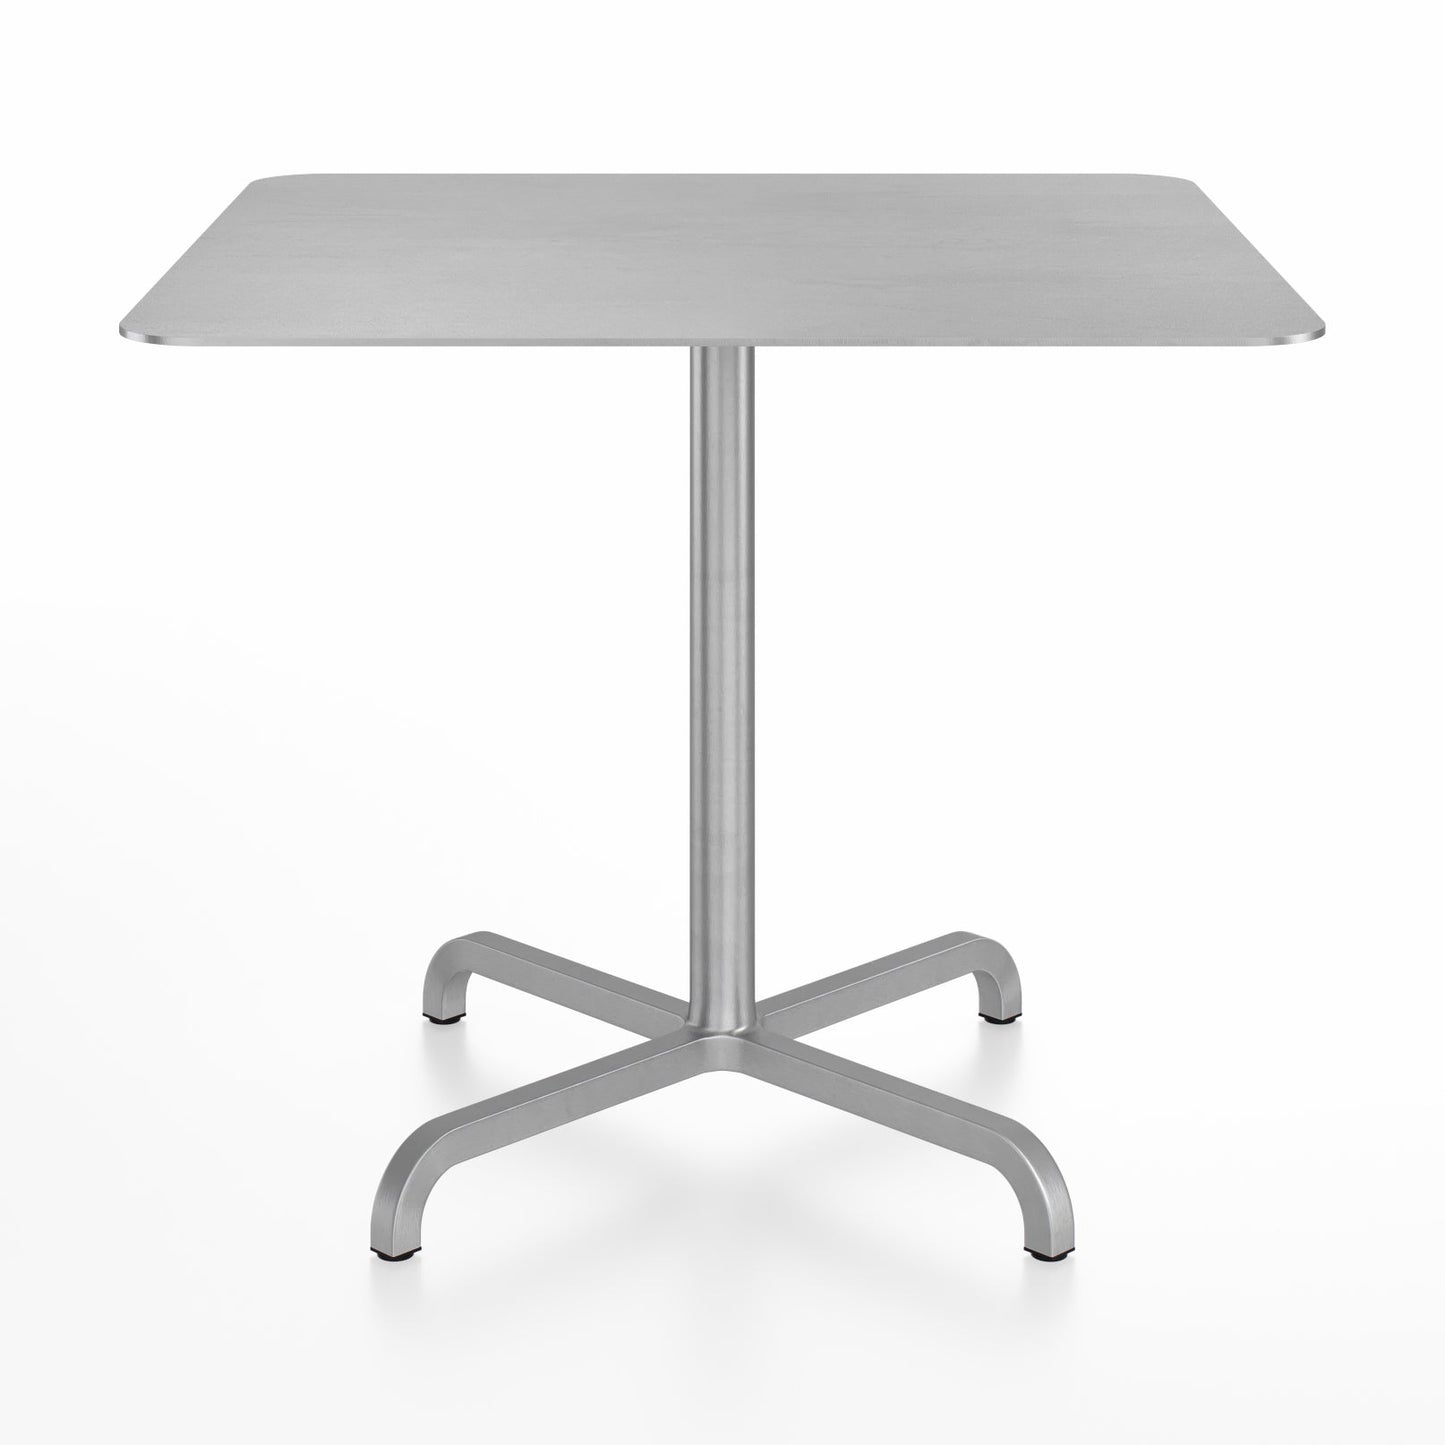 20-06 Square Cafe Table